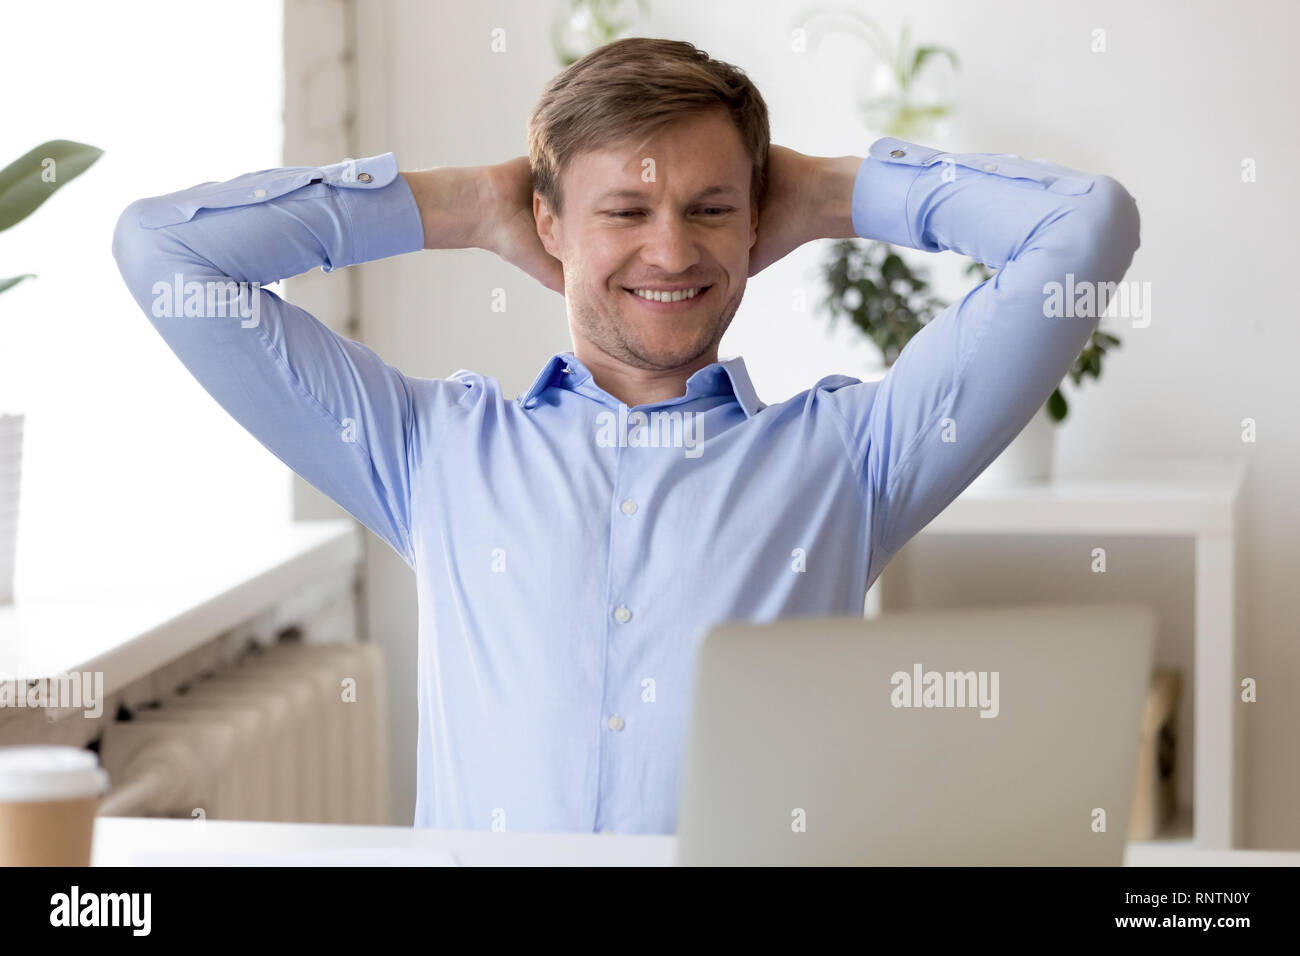 Satisfied businessman sitting at desk put hands behind head Stock Photo